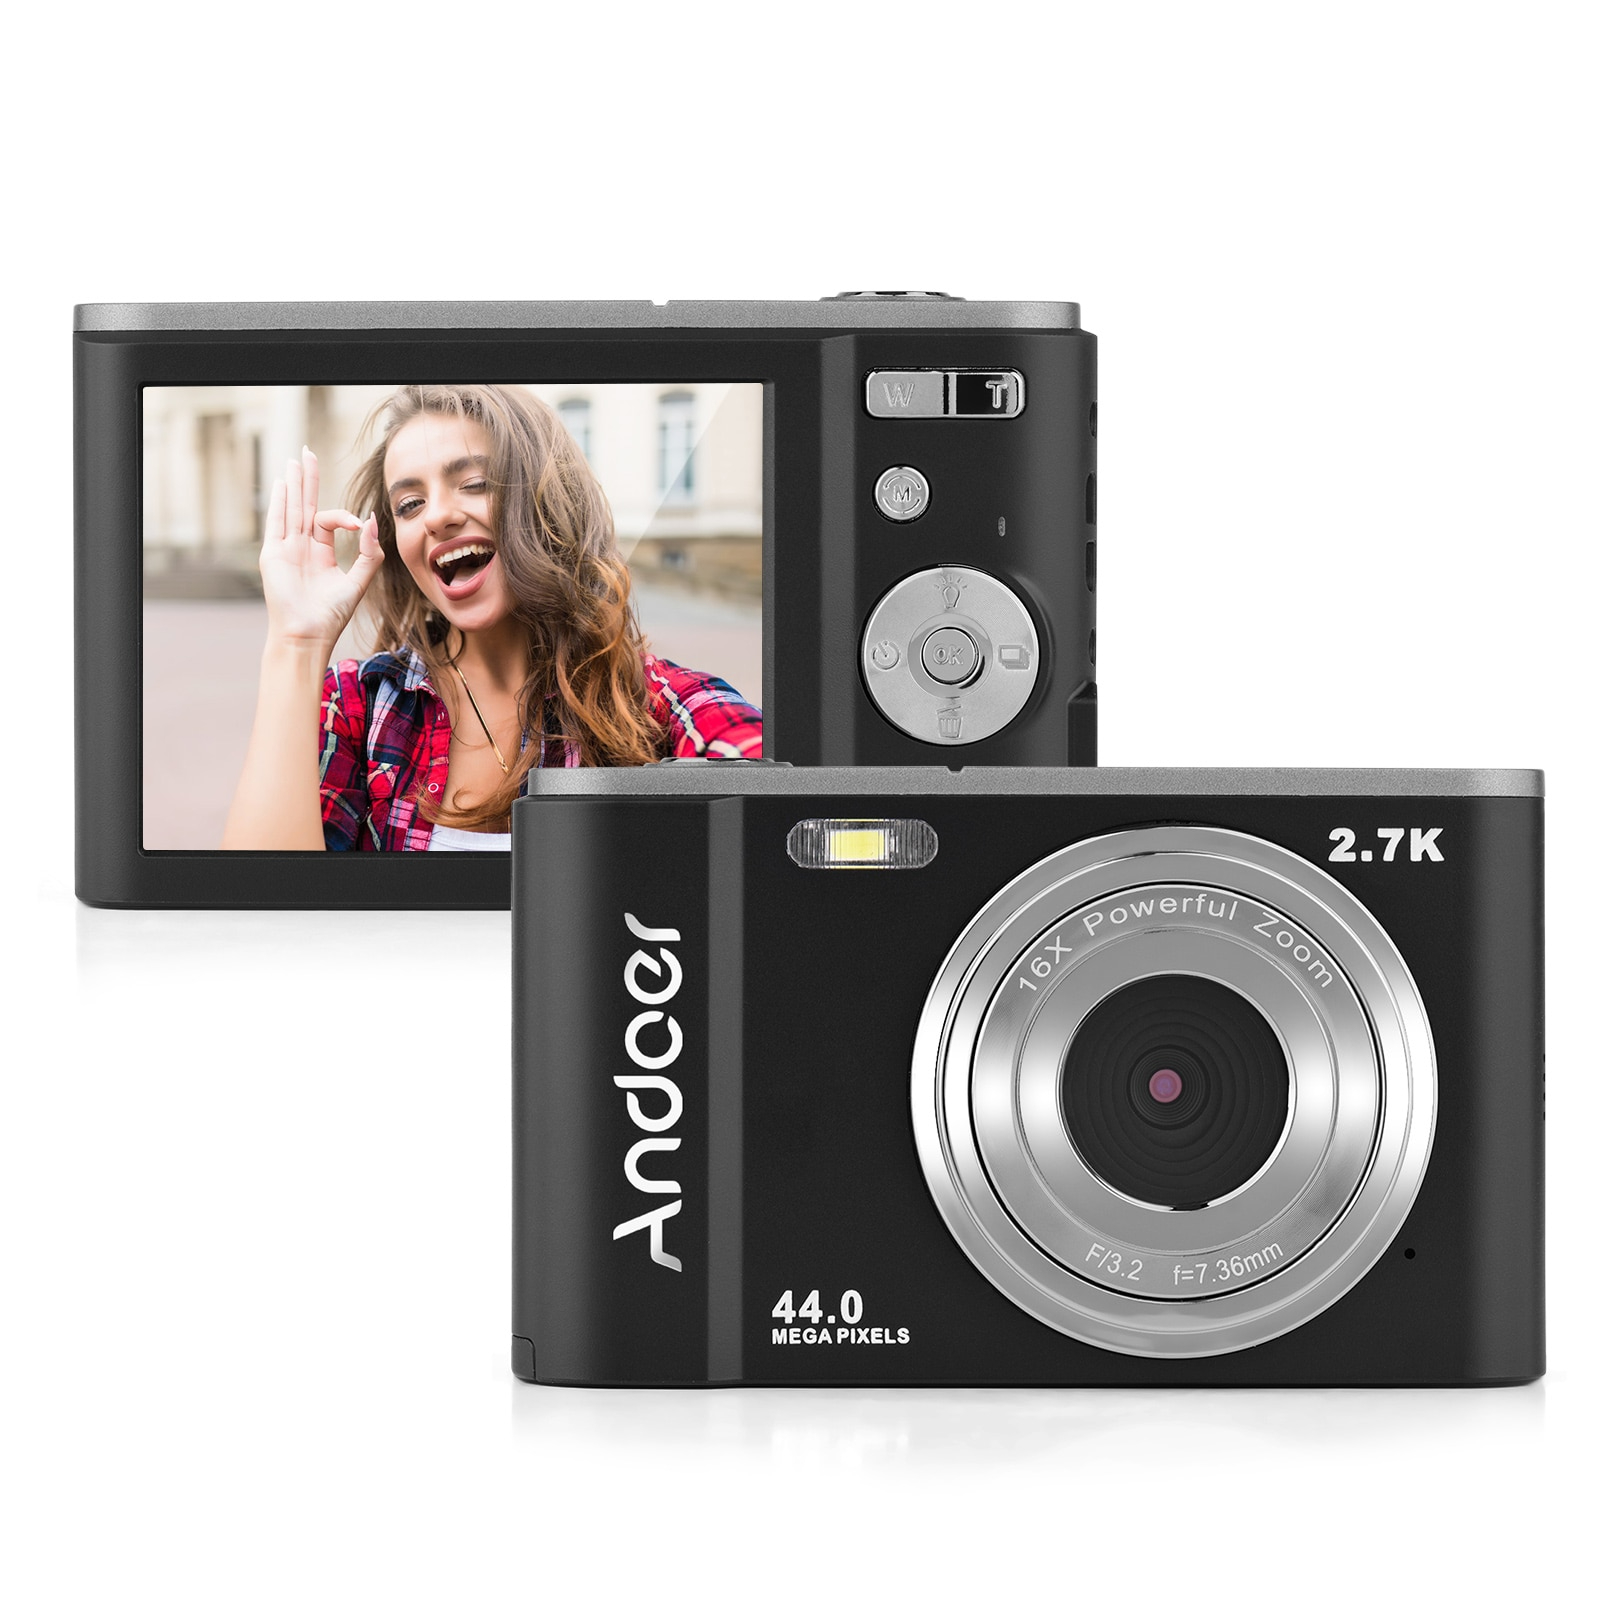 Andoer Mini Digital Camera 44MP 2.7K 2.88-inch IPS Screen 16X Zoom Self-Timer Face Detection Anti-shaking with 2pcs Batteries